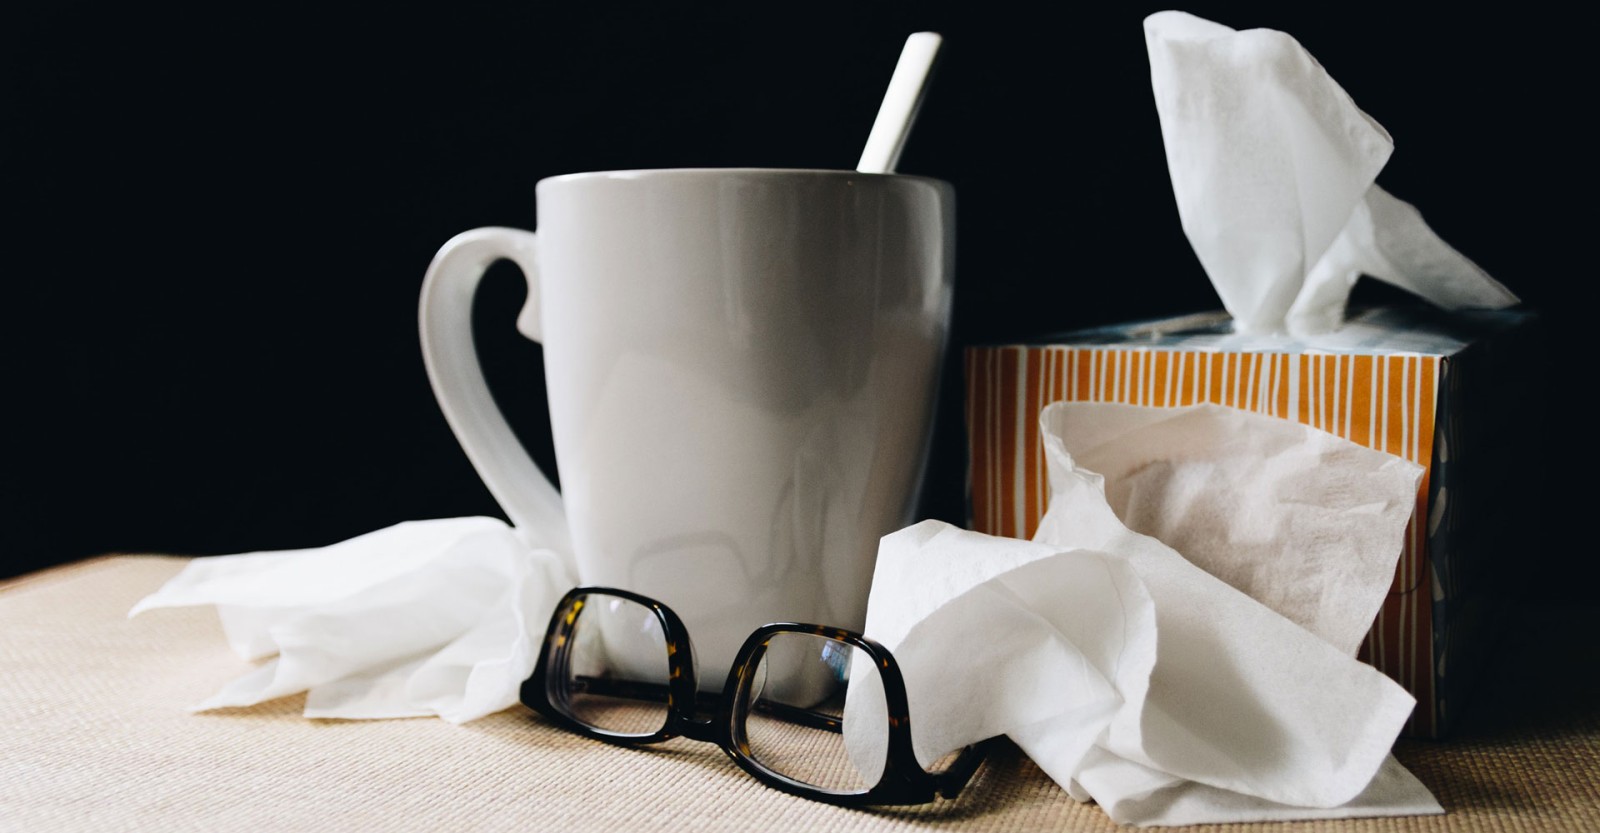 used tissues, hot drink and glasses suggesting a cold or flu